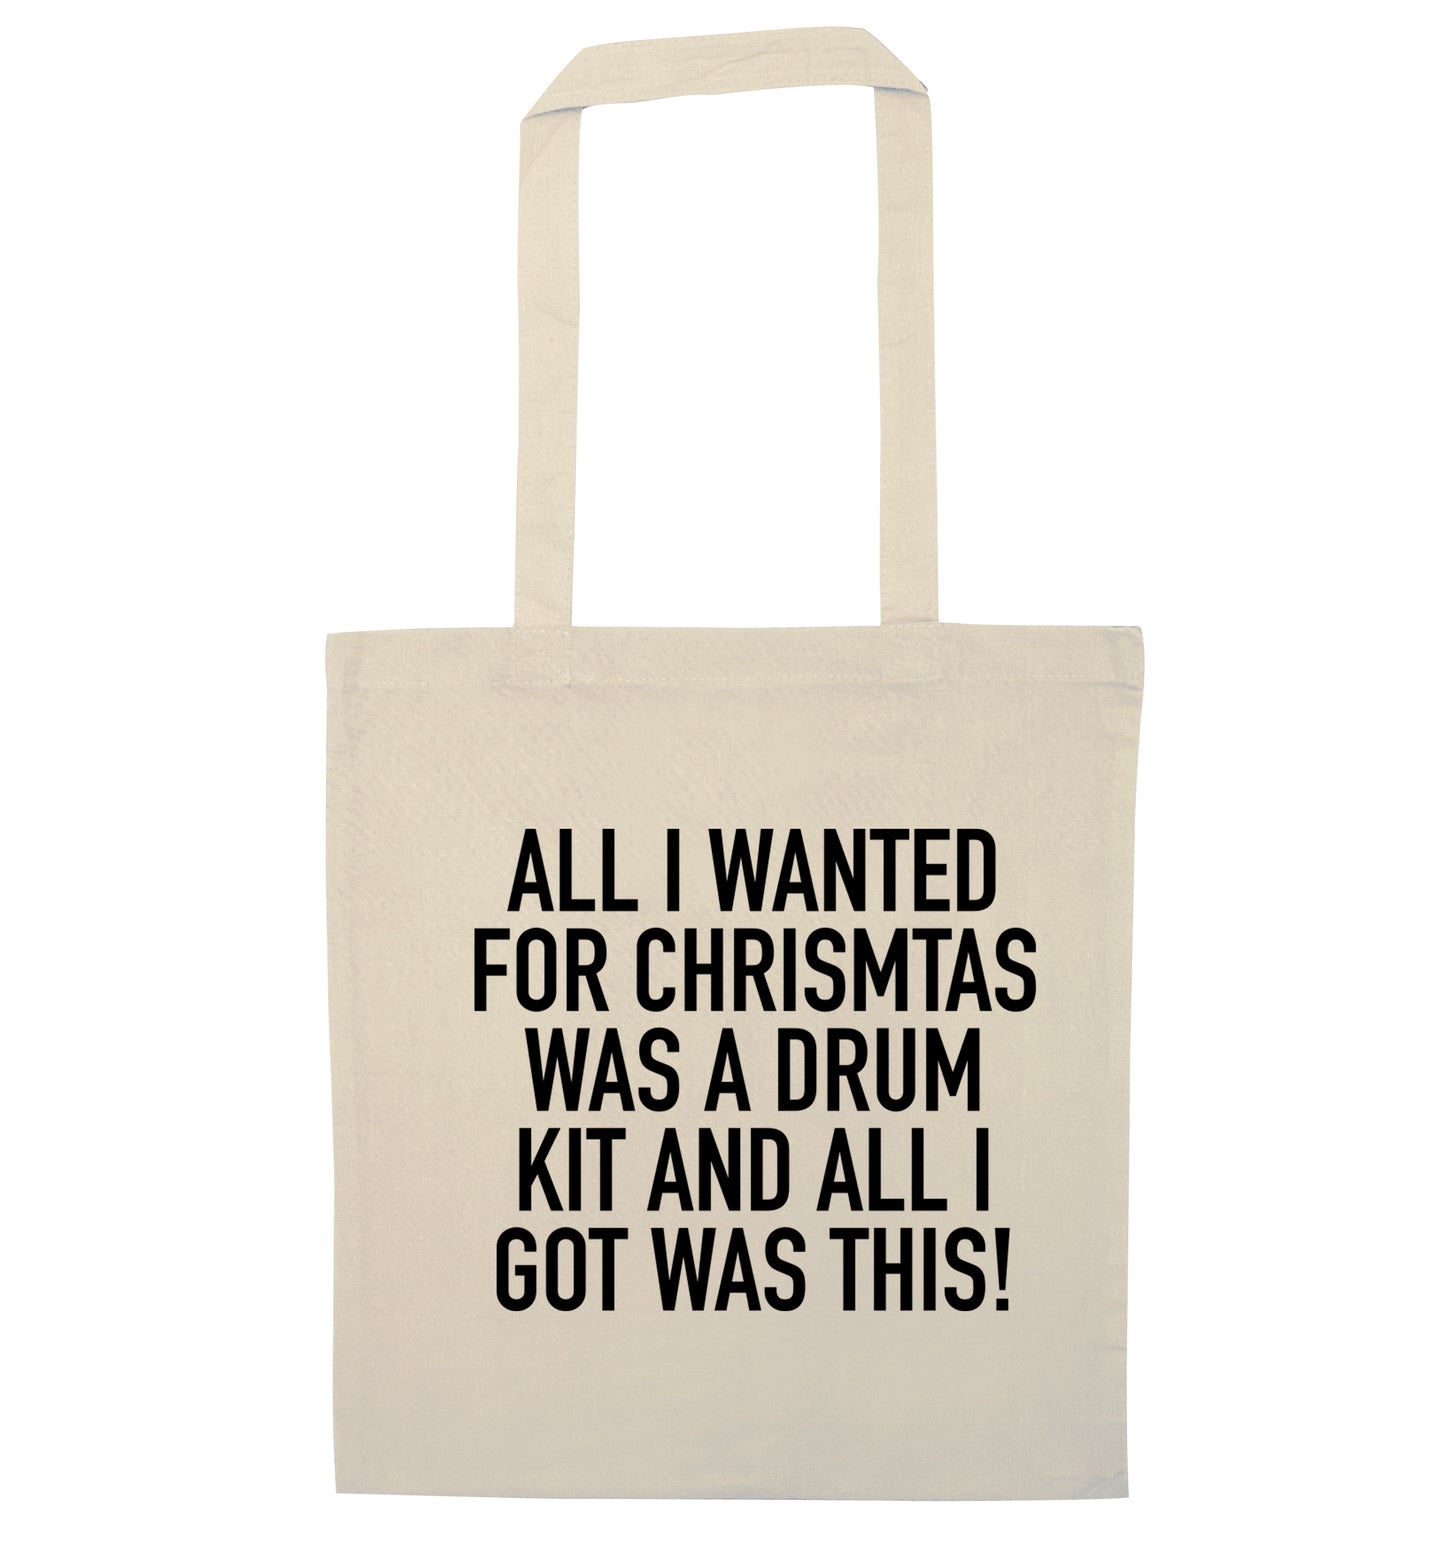 All I wanted for Christmas was a drum kit and all I got was this! natural tote bag